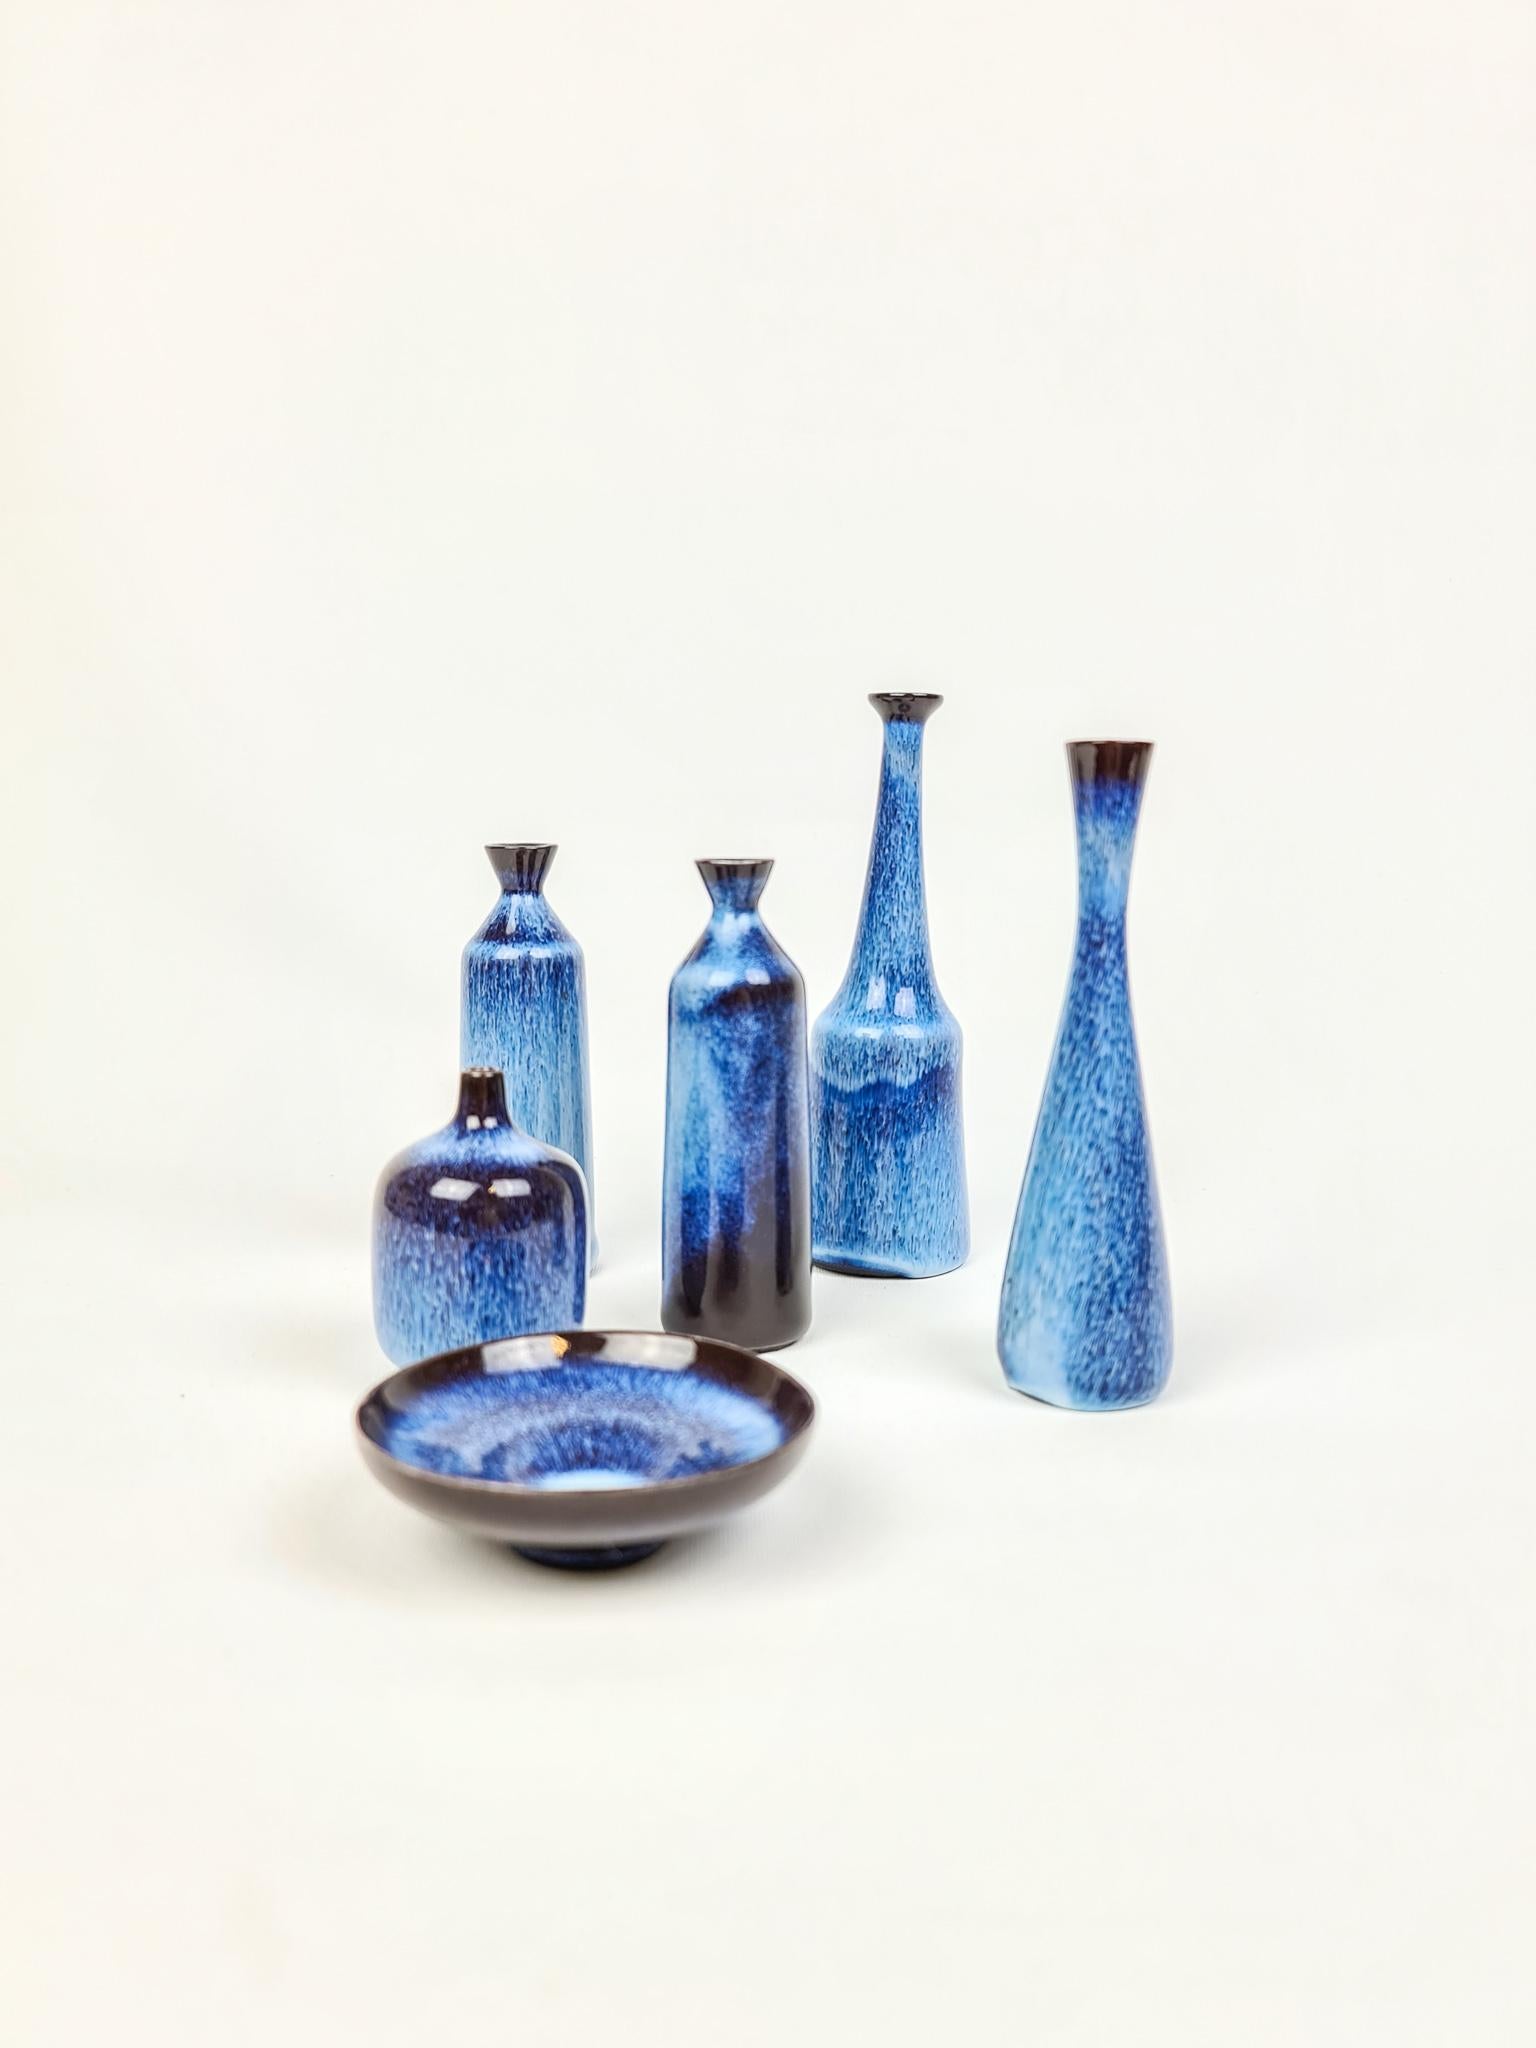 Six wonderful miniature vases from Rörstrand and maker/Designer Gunnar Nylund. Made in Sweden in the midcentury. Beautiful glazed vases in good condition. 

Measures: Height 15 cm to 6 cm in height.